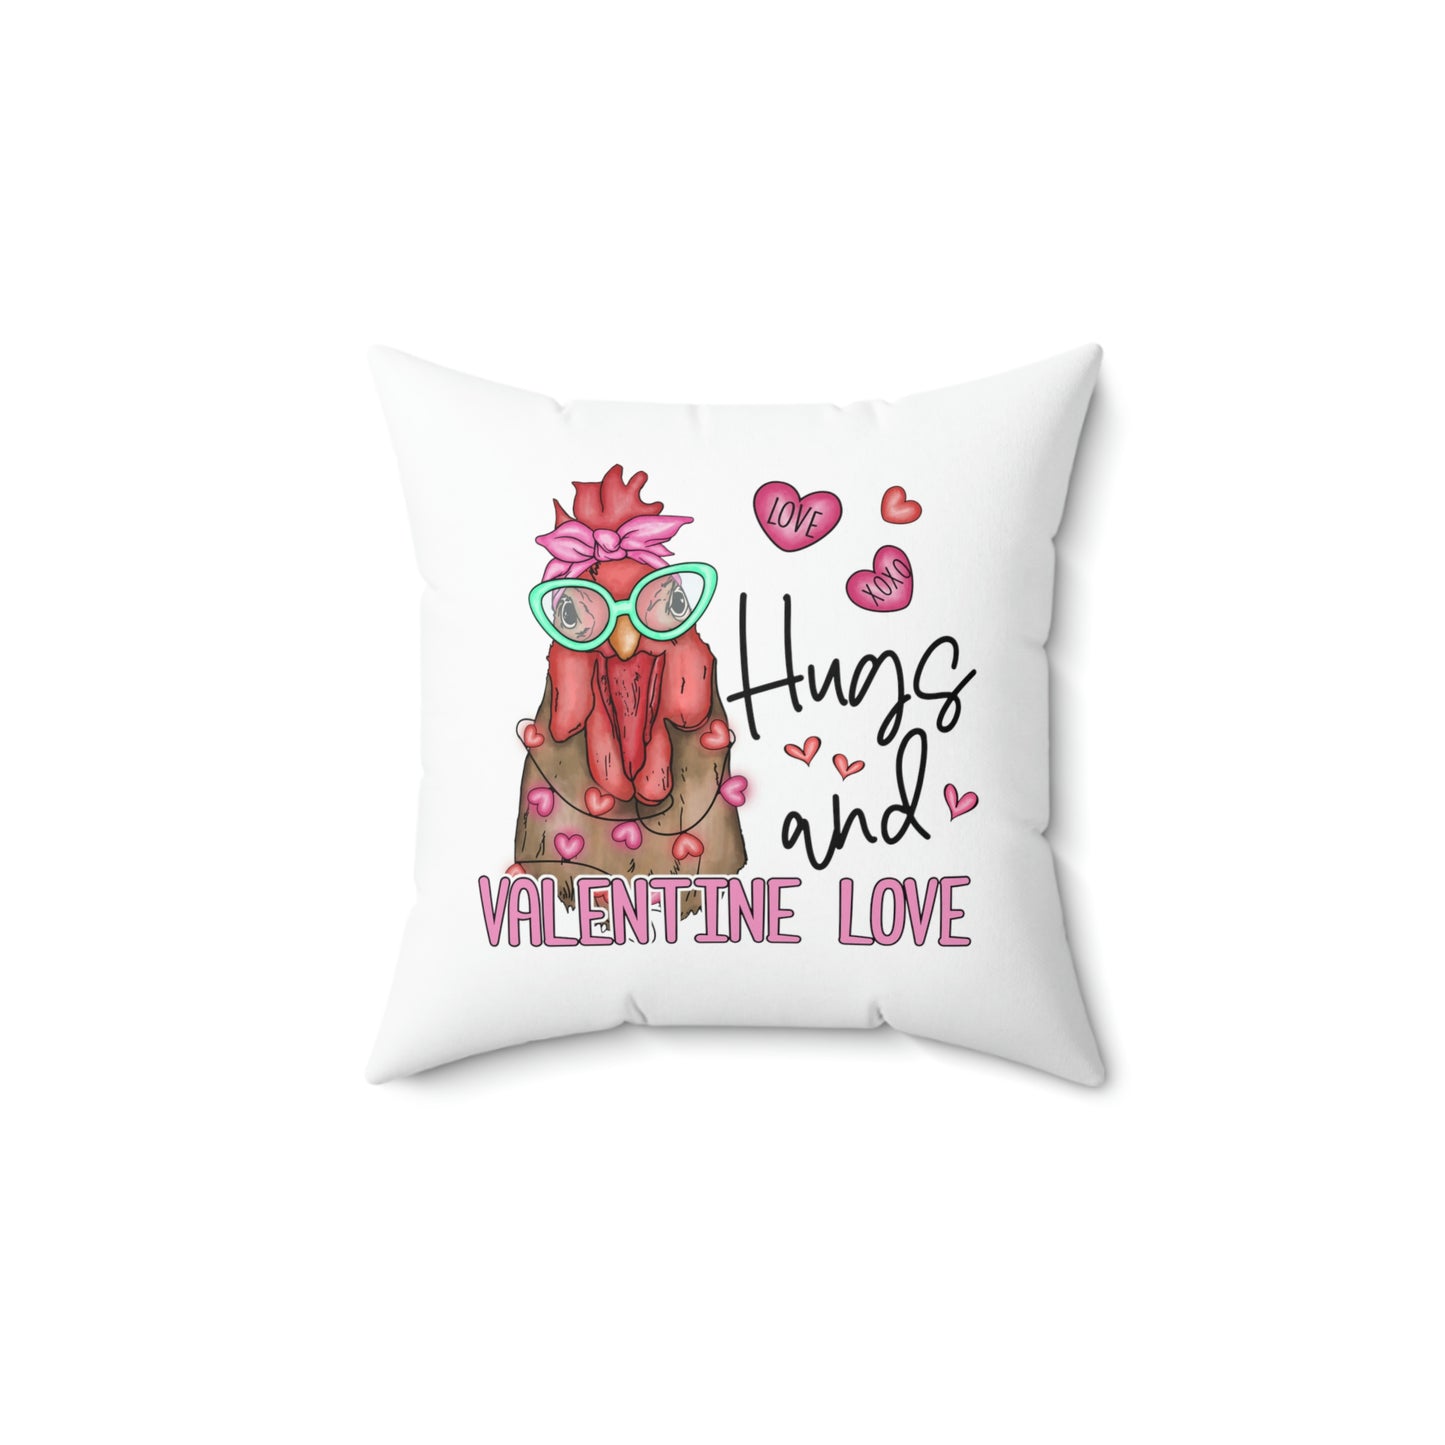 Valentines Day Pillow / Rooster Pillow / Valentines Day Decor / Rooster Cushion / Heart Pillow / Cute Valentines Day Pillow